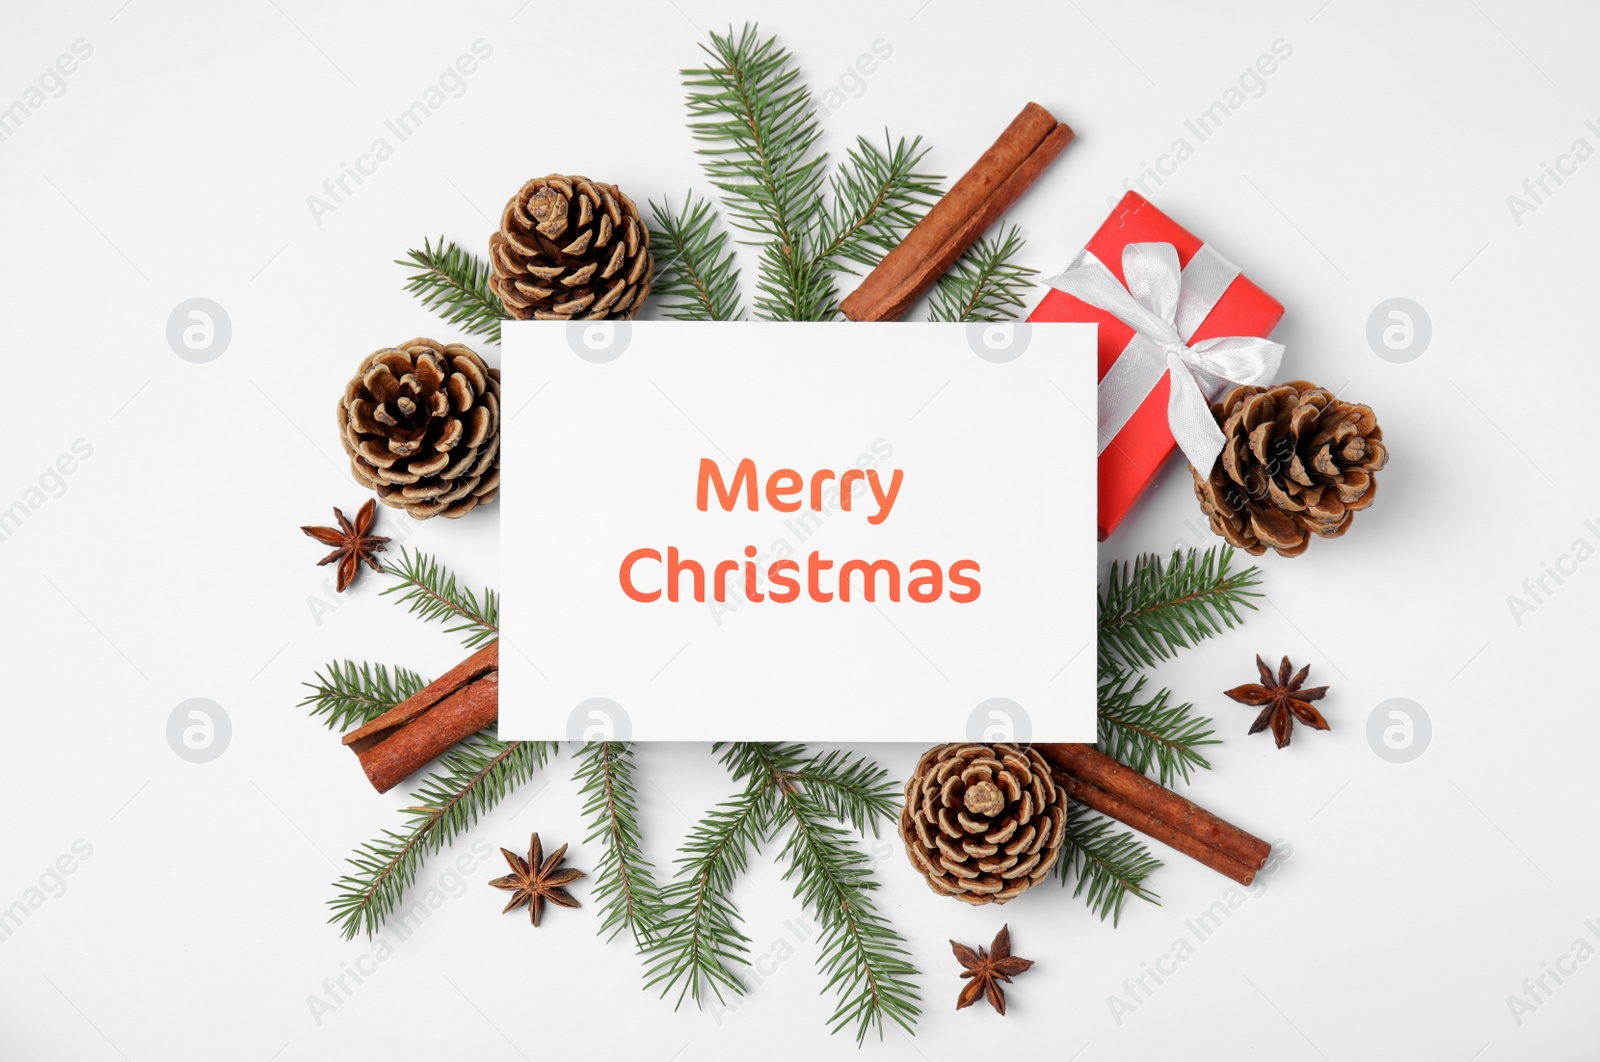 Image of Greeting card with phrase Merry Christmas, beautiful fir tree branches, gift box, pine cones and cinnamon sticks on white background, flat lay